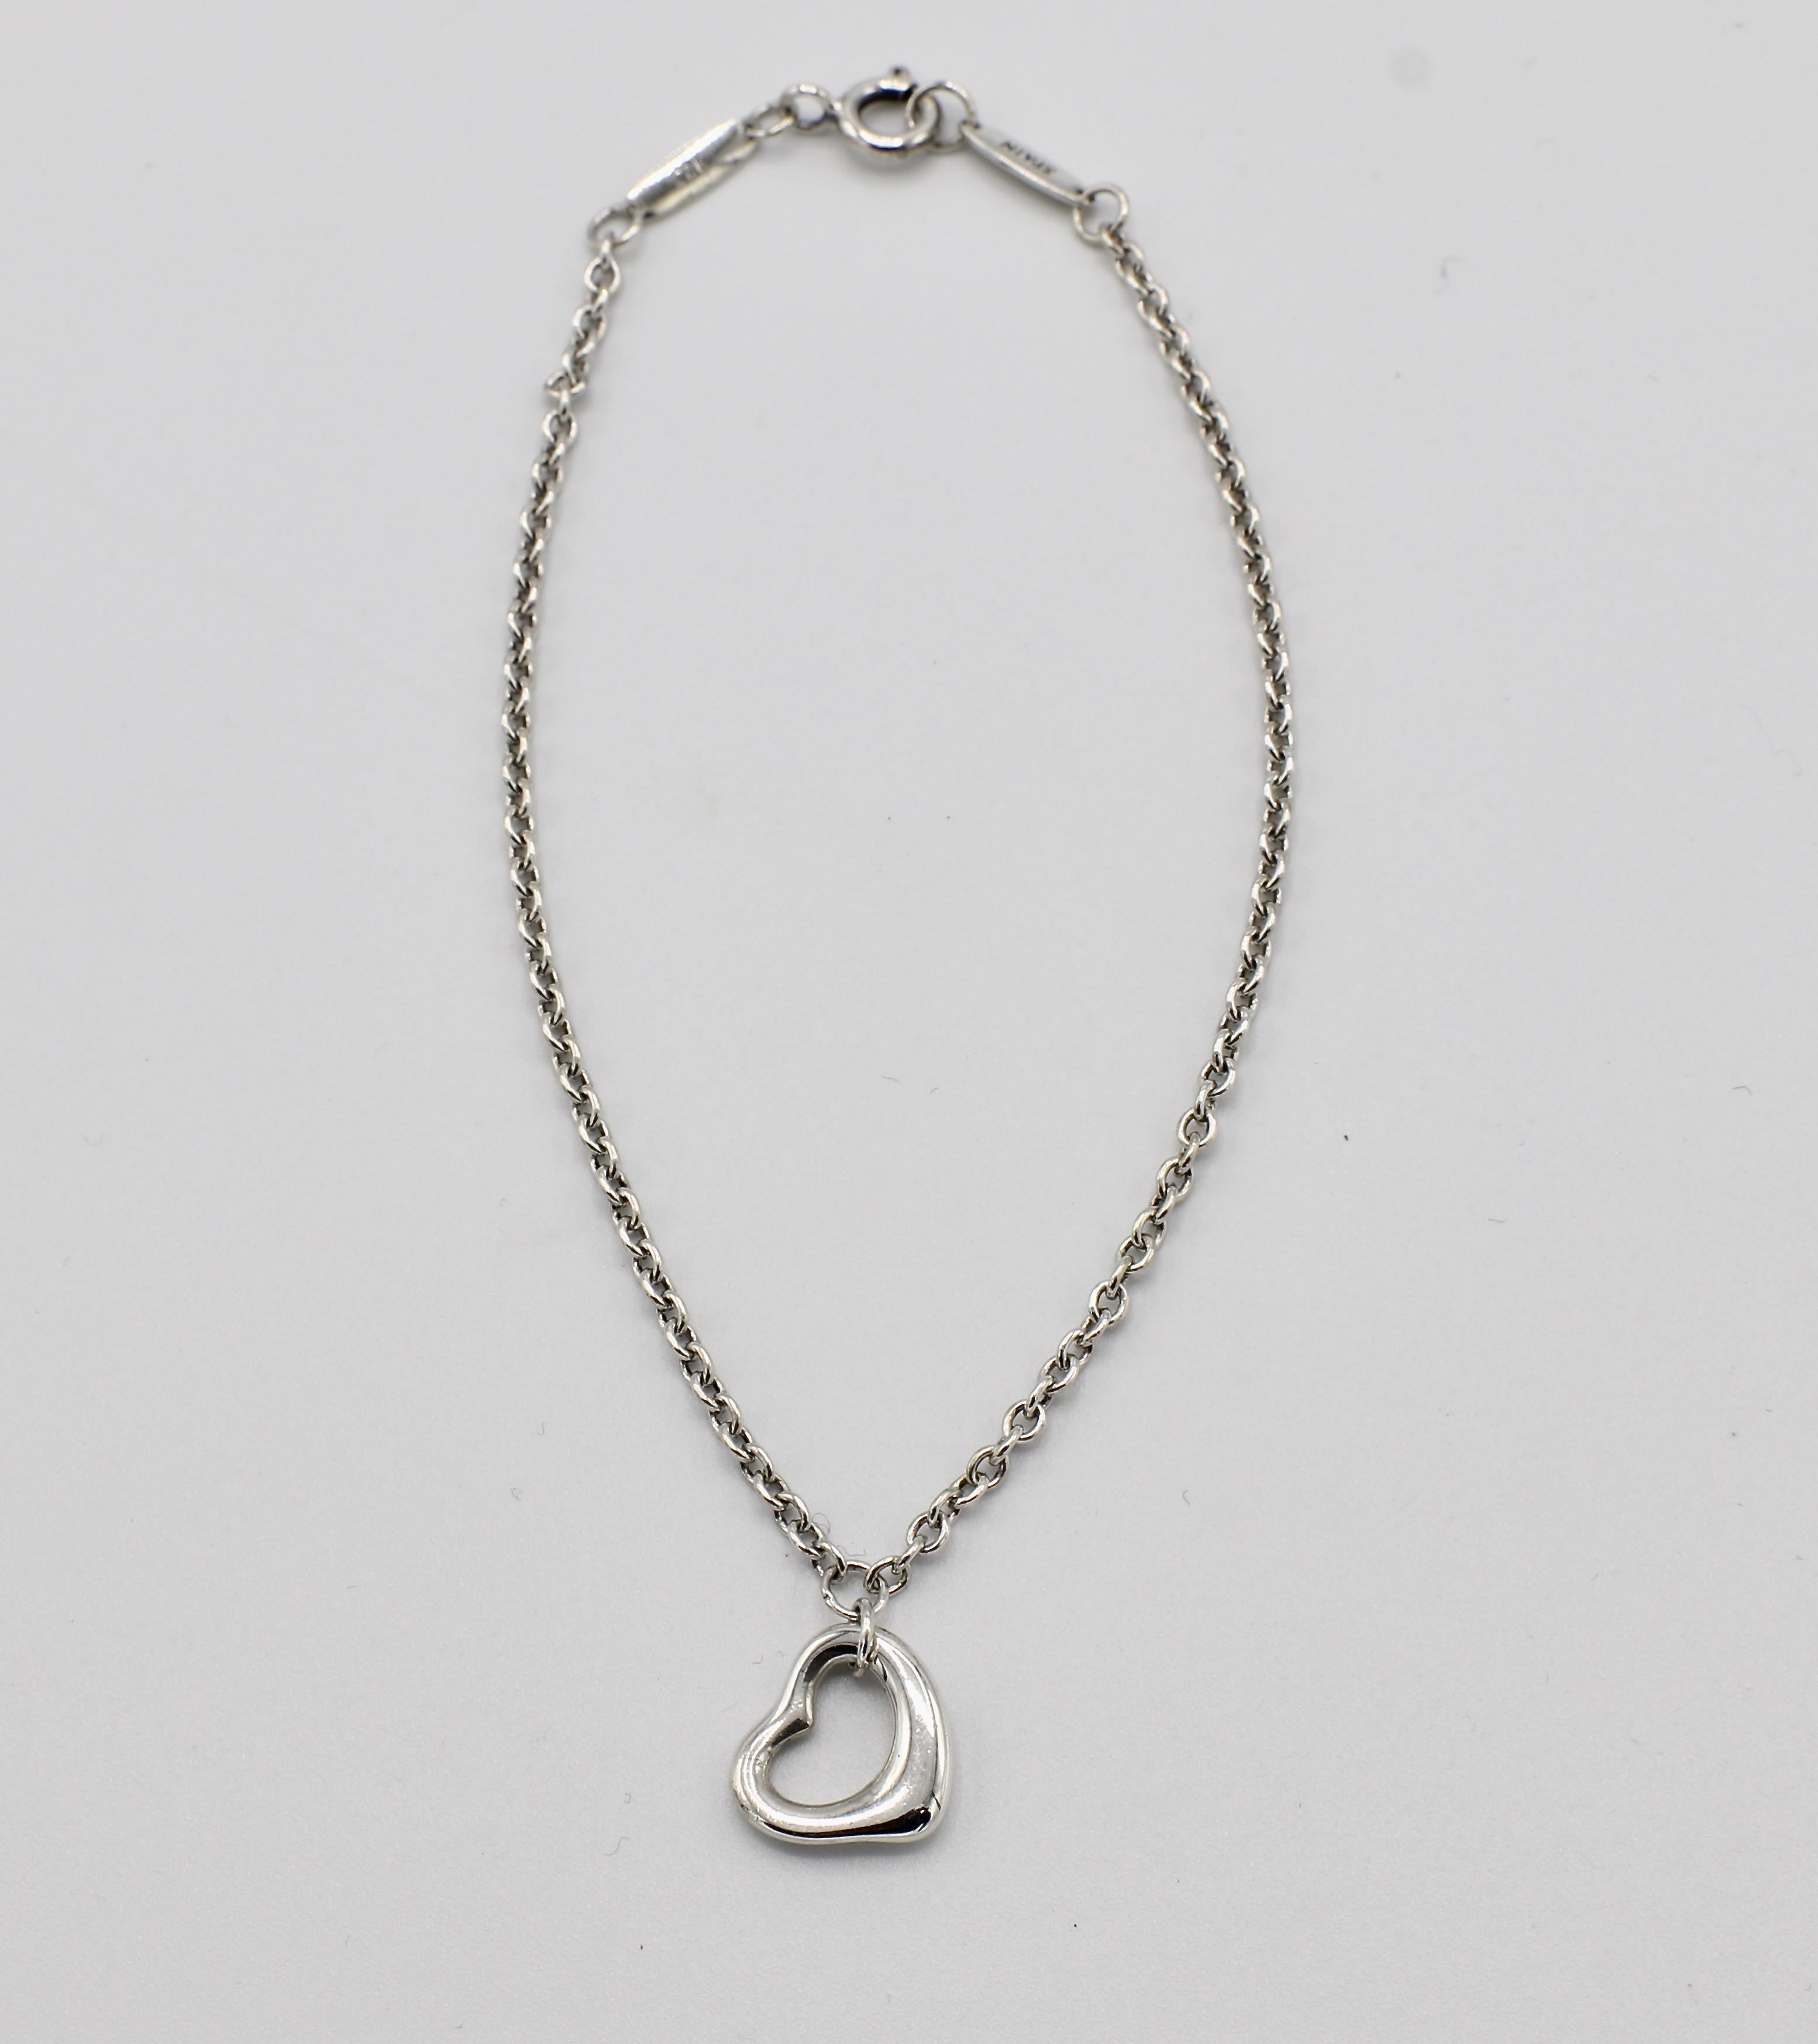 Tiffany & Co. Elsa Peretti Sterling Silver Open Heart Bracelet 7.5 Inches 
Metal: Sterling silver 925
Weight: 2.48 grams
Length: 7.5 inches 
Charm is approx. 11 x 9mm 
Signed: Tiffany & Co. PERETTI SPAIN 925